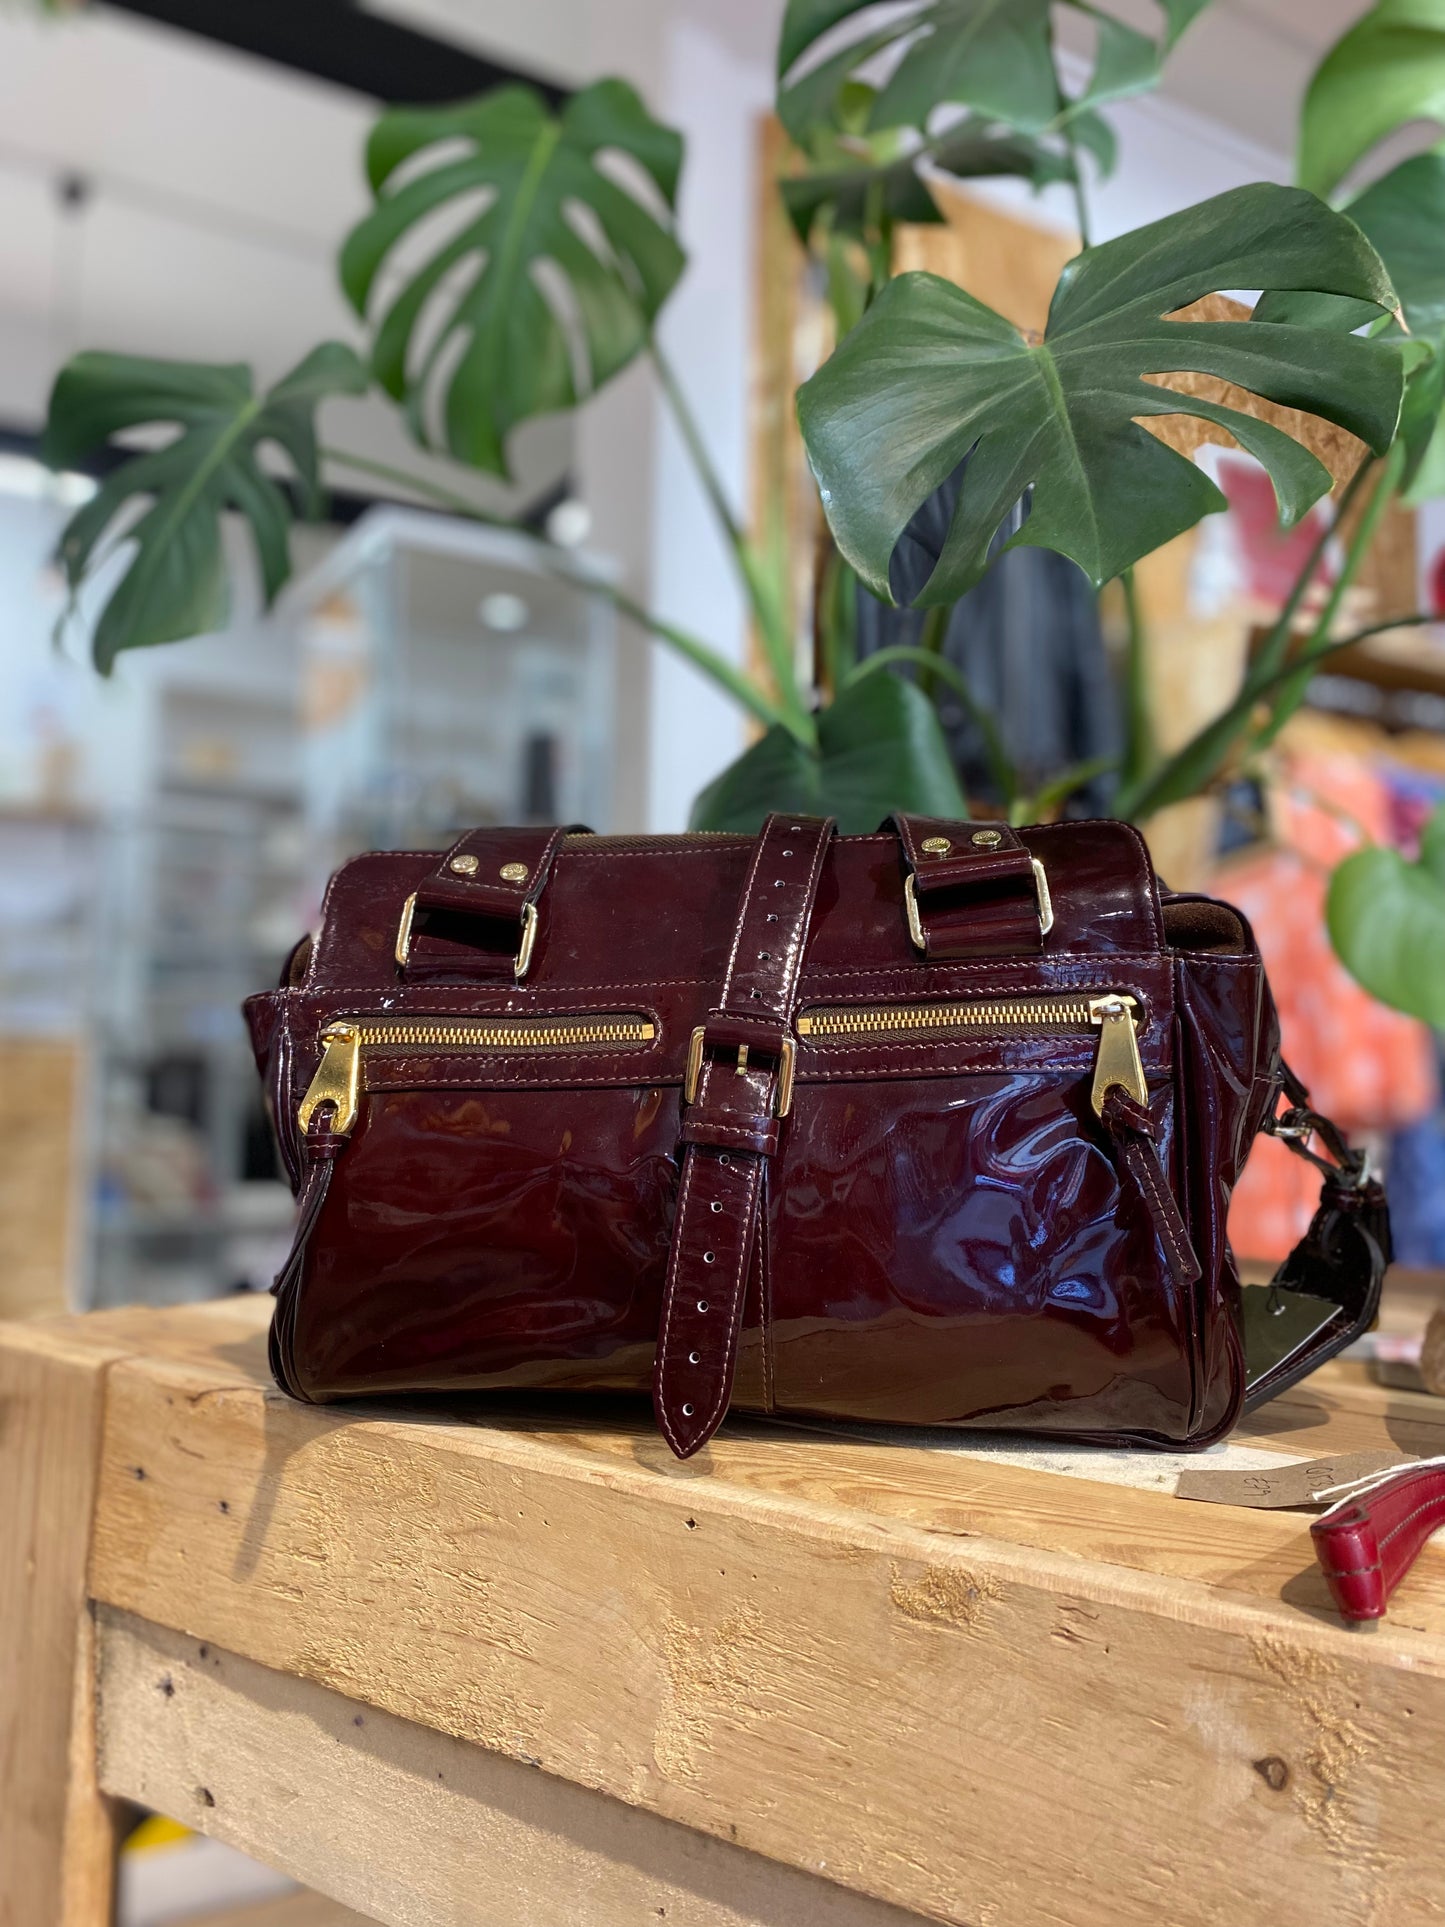 Mulberry - Maroon Leather Satchel w/ Buckle